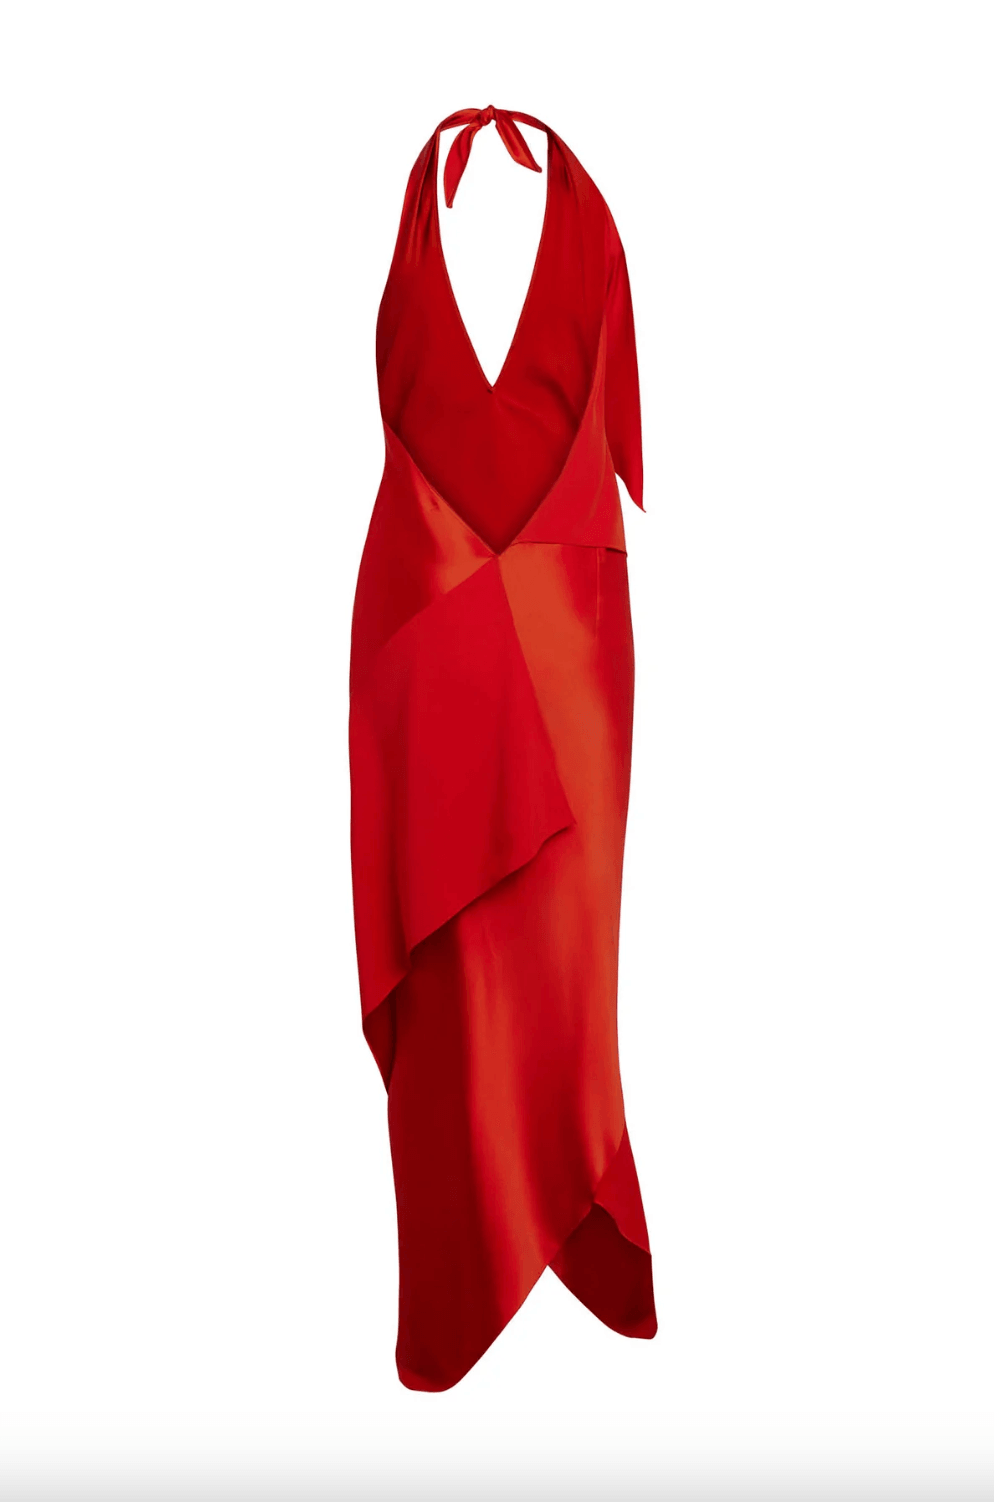 Diane Dress in High Risk Red by Catherine Gee - Haven